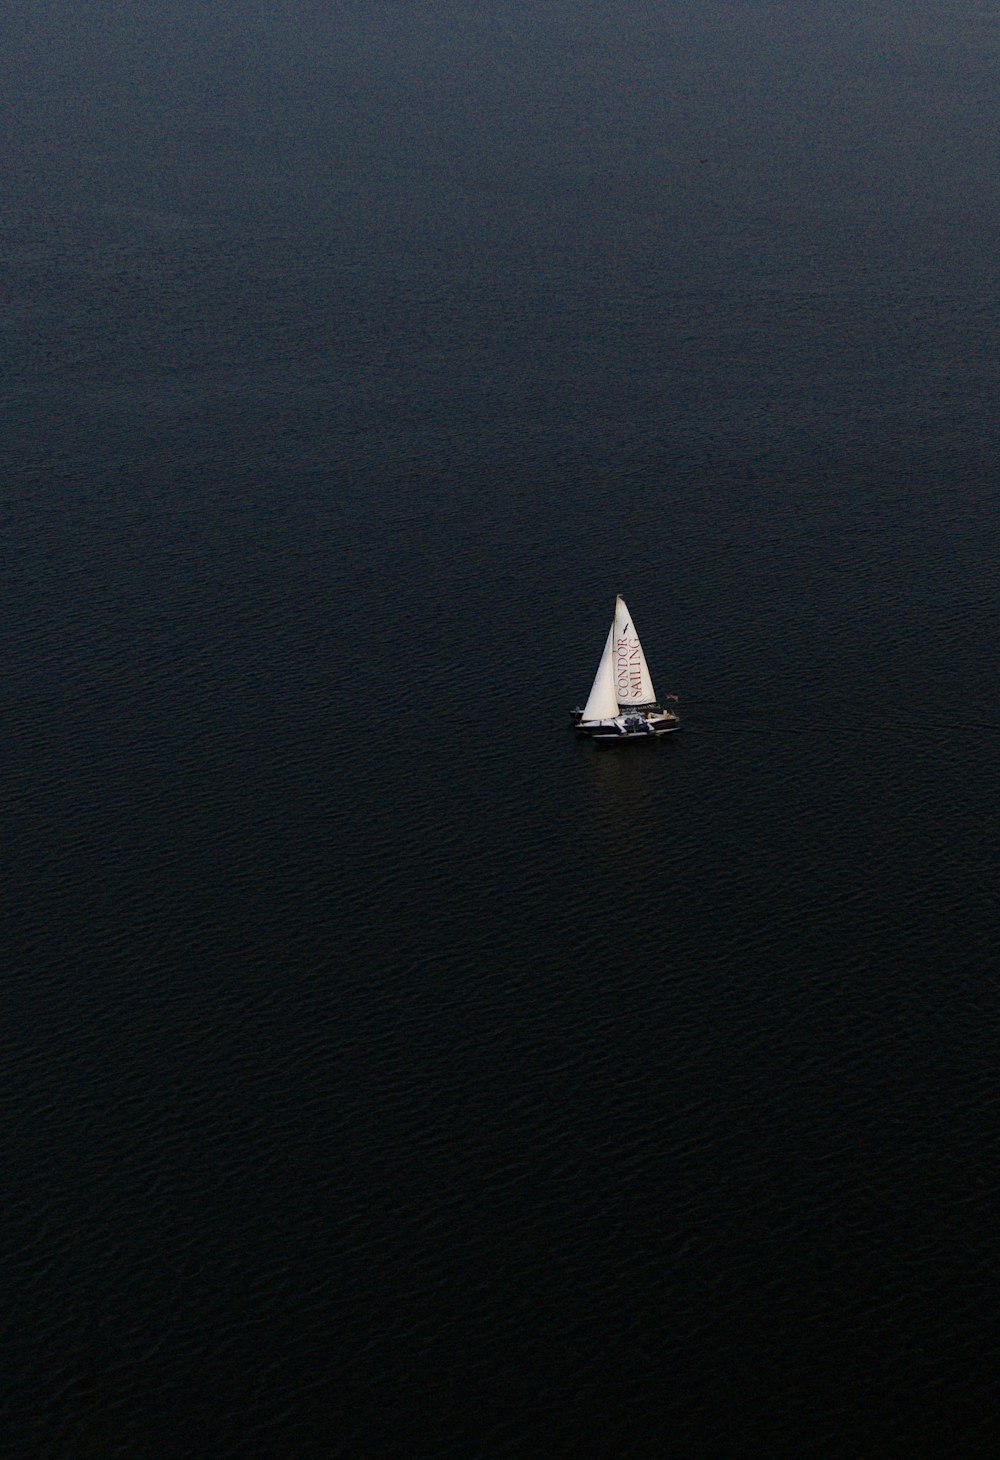 white sailboat on body of water during daytime